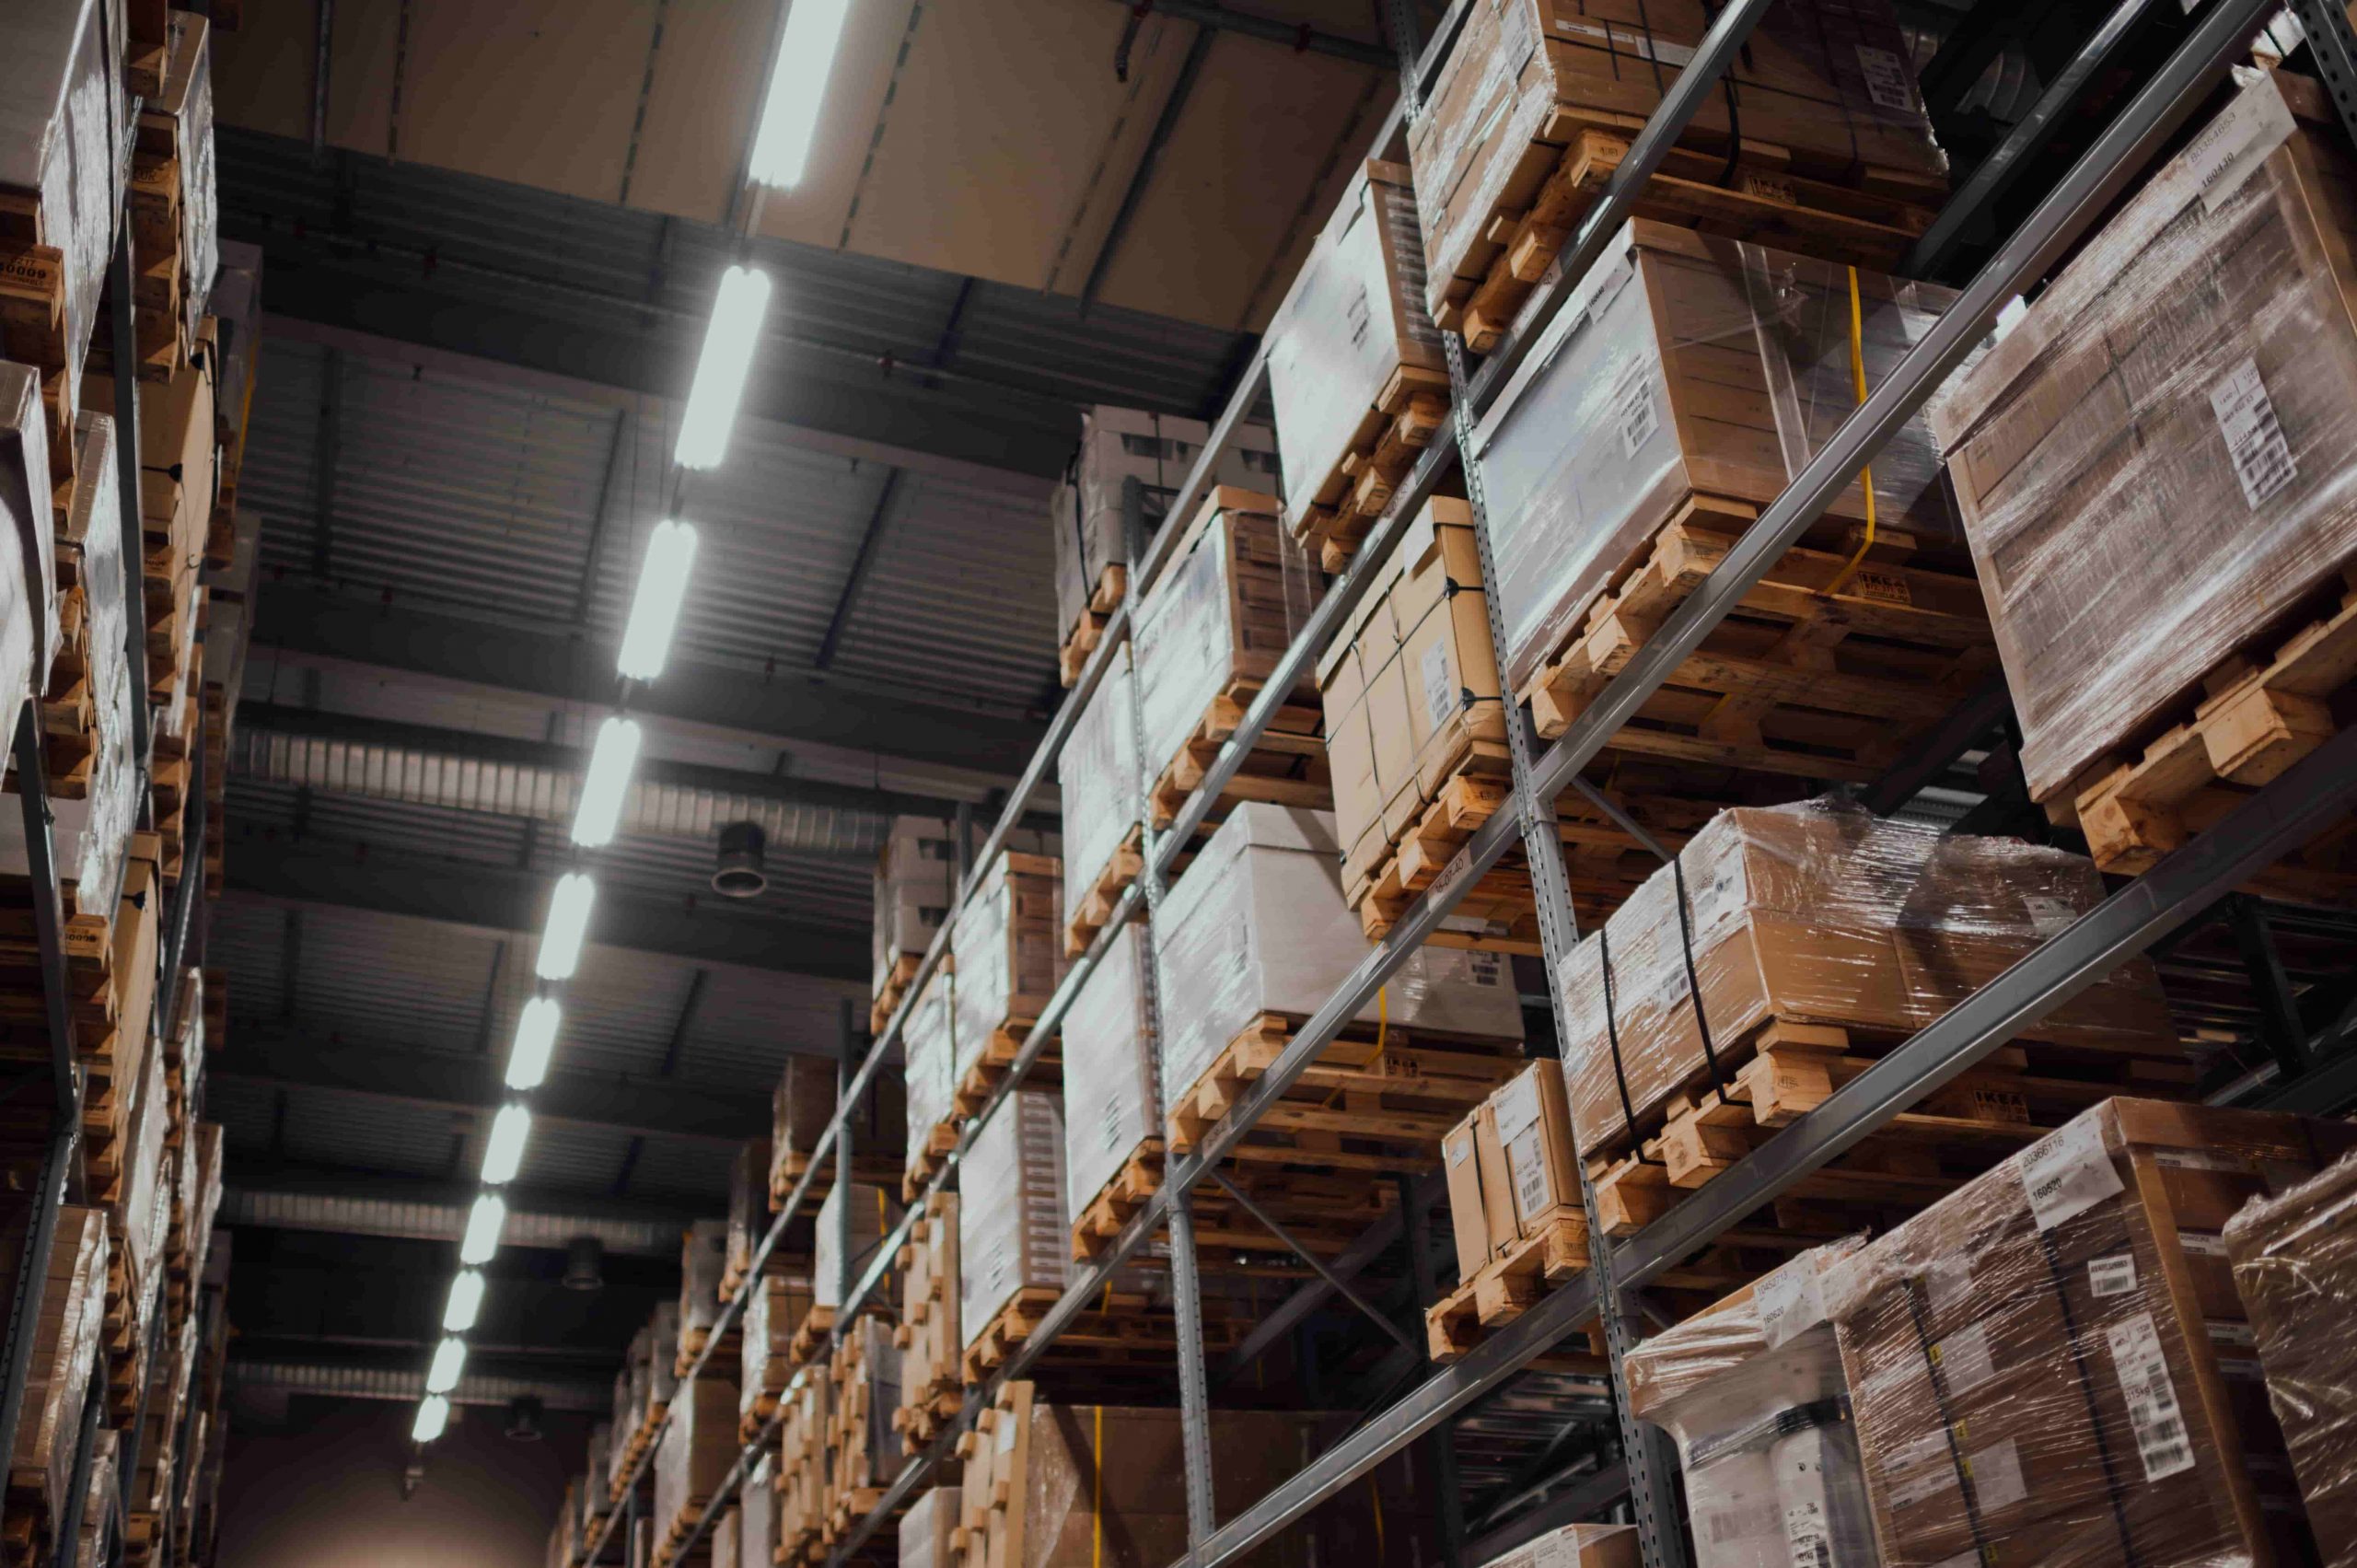 Order management in a warehouse